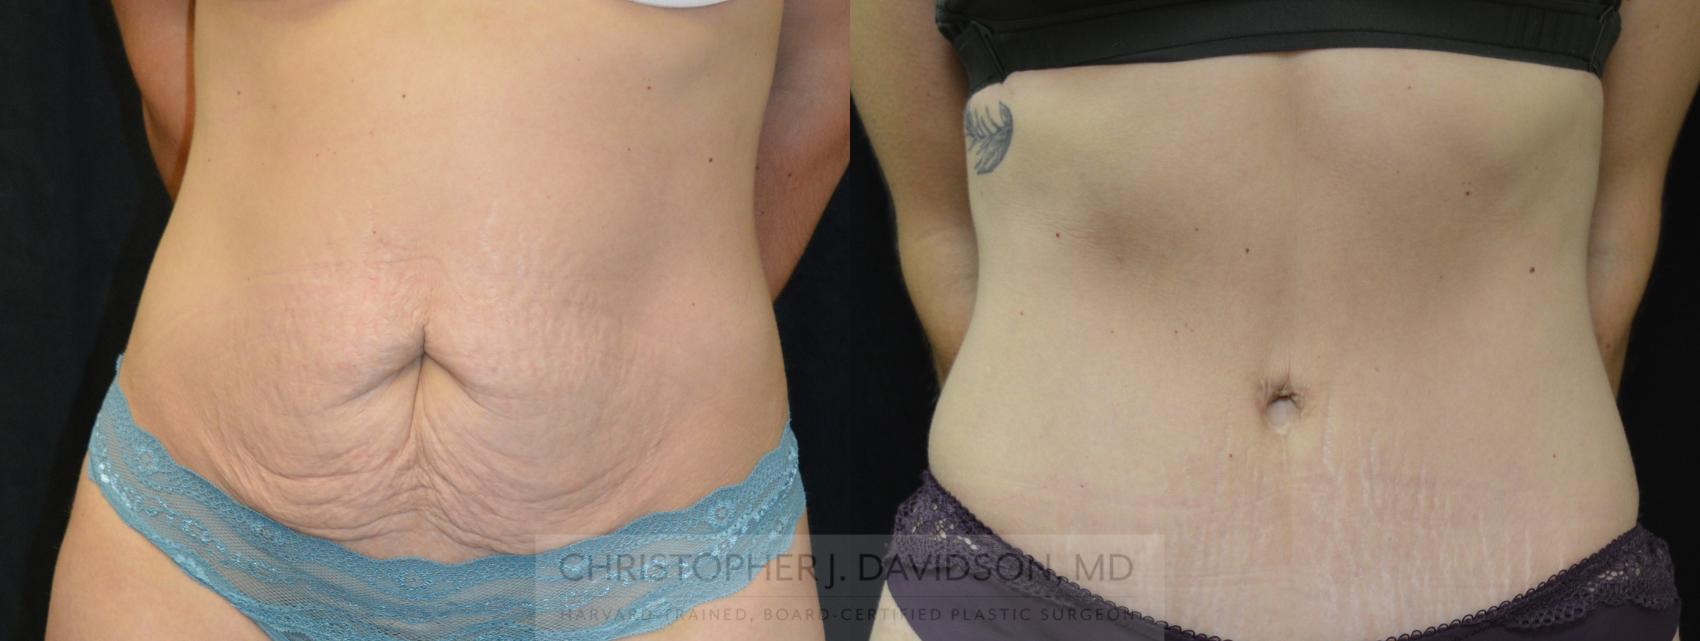 Tummy Tuck (Abdominoplasty) Case 262 Before & After Front | Wellesley, MA | Christopher J. Davidson, MD